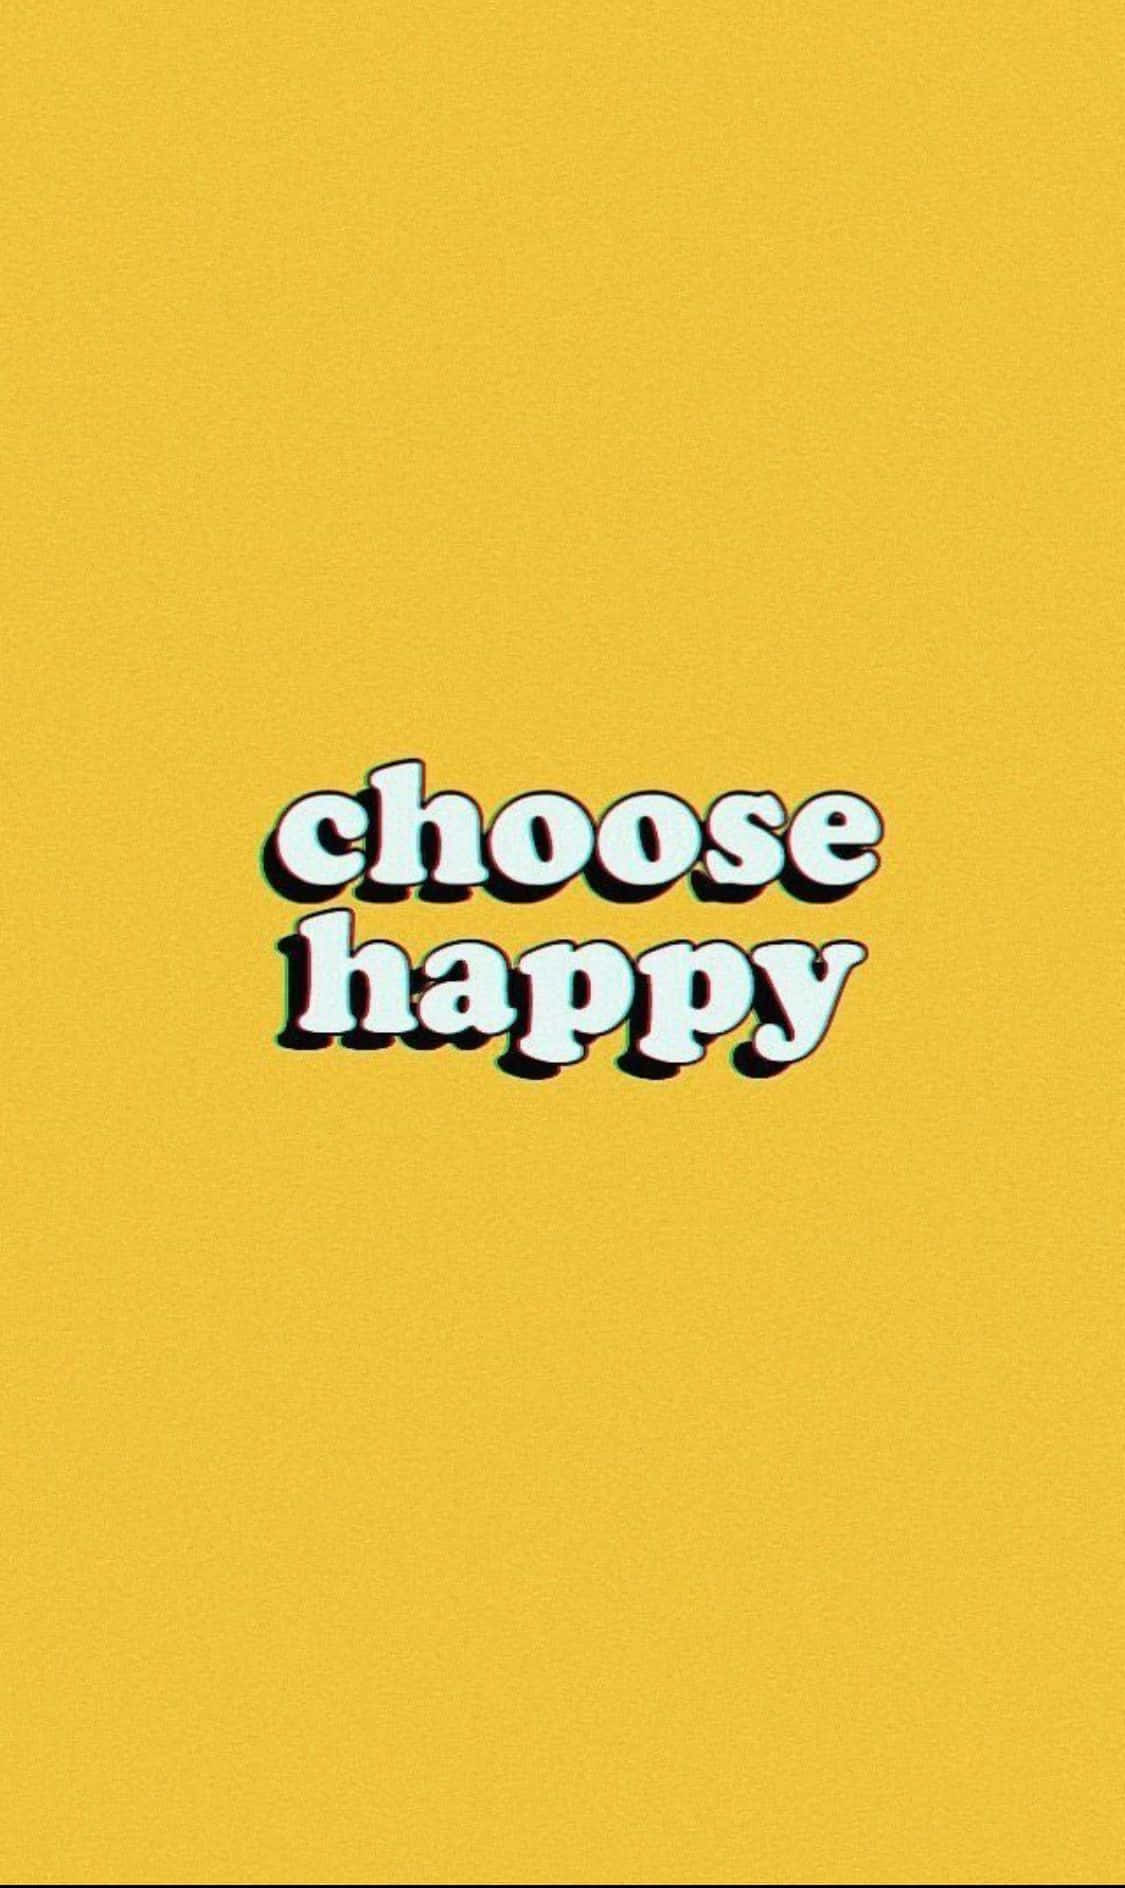 Choose Happy - A Yellow Background With The Words